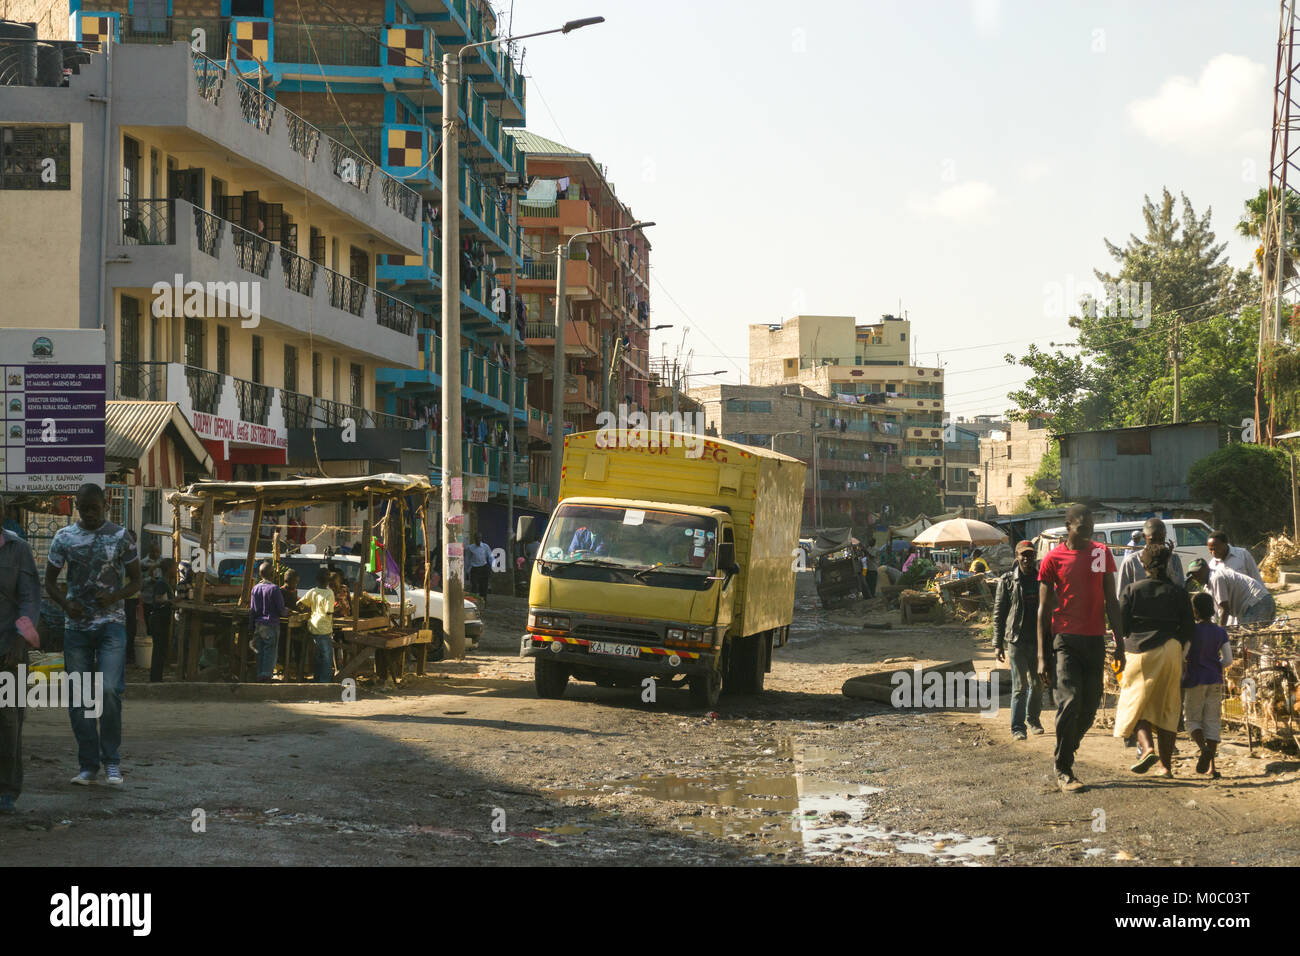 View down a road in Huruma, a district of Nairobi, showing a truck driving down the muddy road as well as people and buildings, Nairobi, Kenya, East A Stock Photo